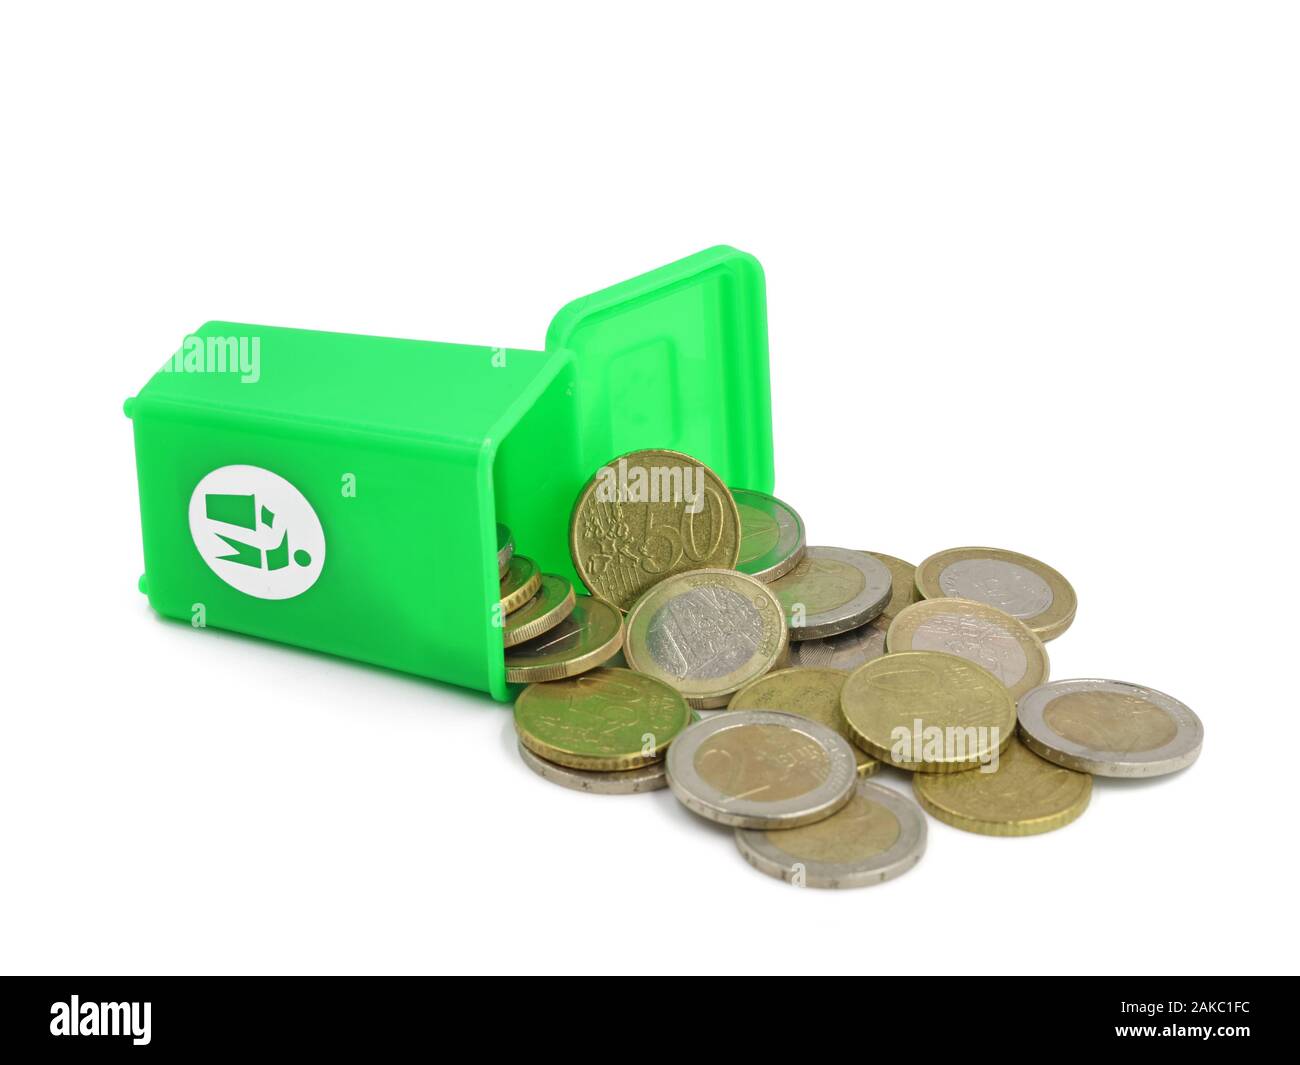 Euro coins in a green dust bin isolated on white background, concept of money wasting Stock Photo